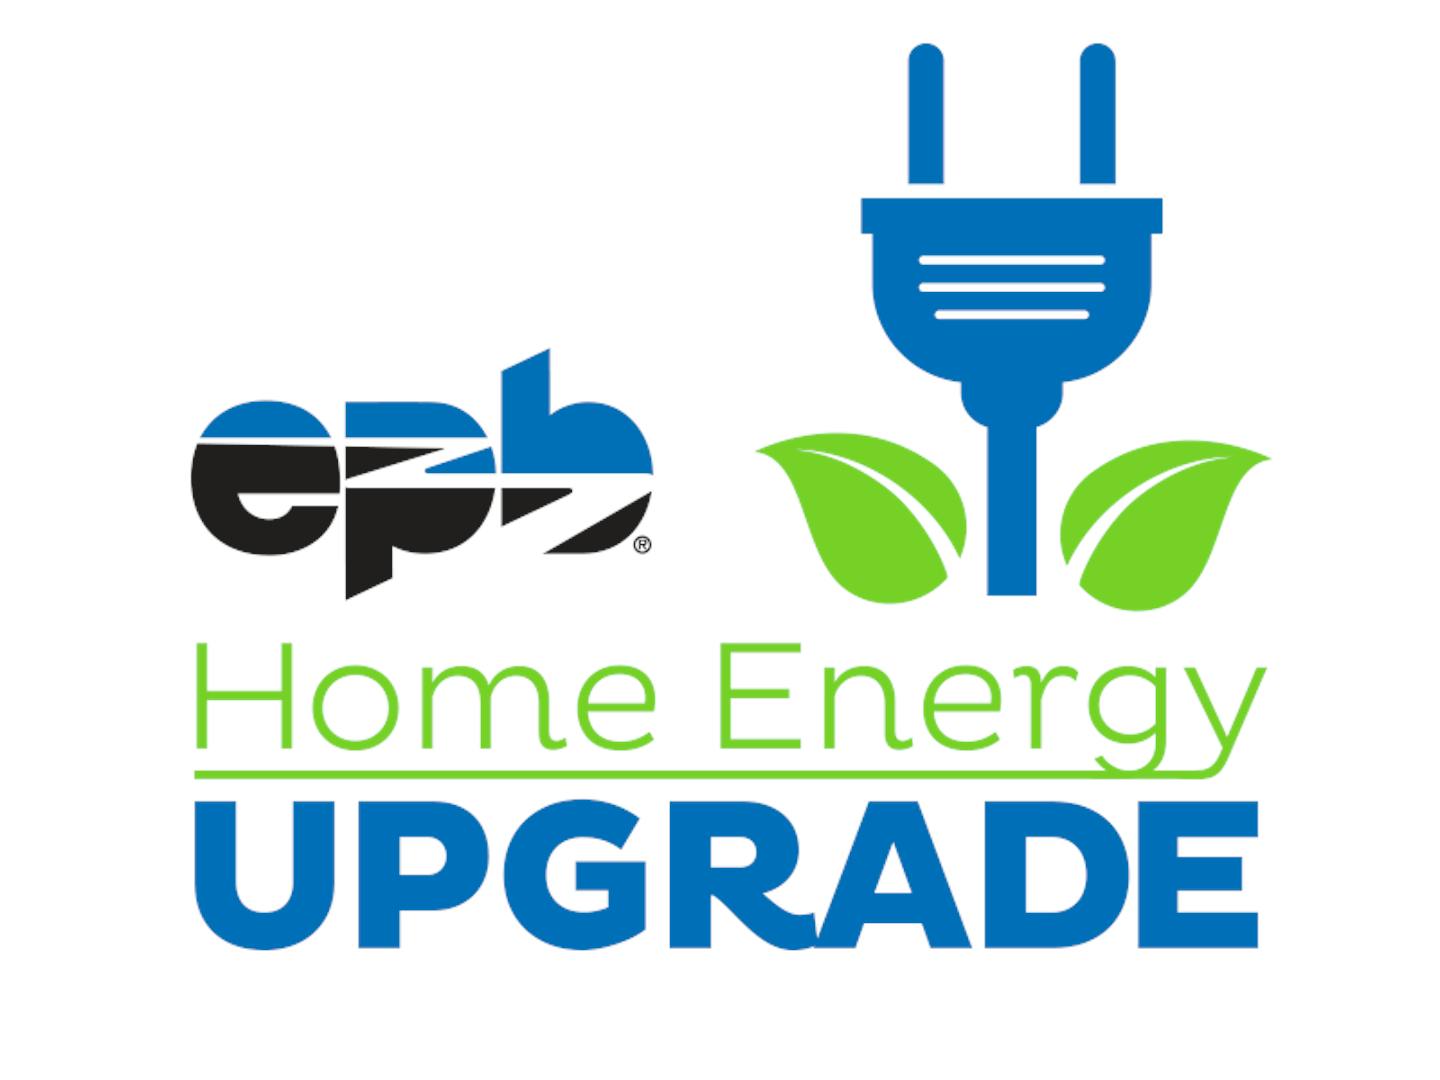 epb-to-continue-home-energy-upgrade-program-following-positive-results-for-customers-in-pilot-program.png